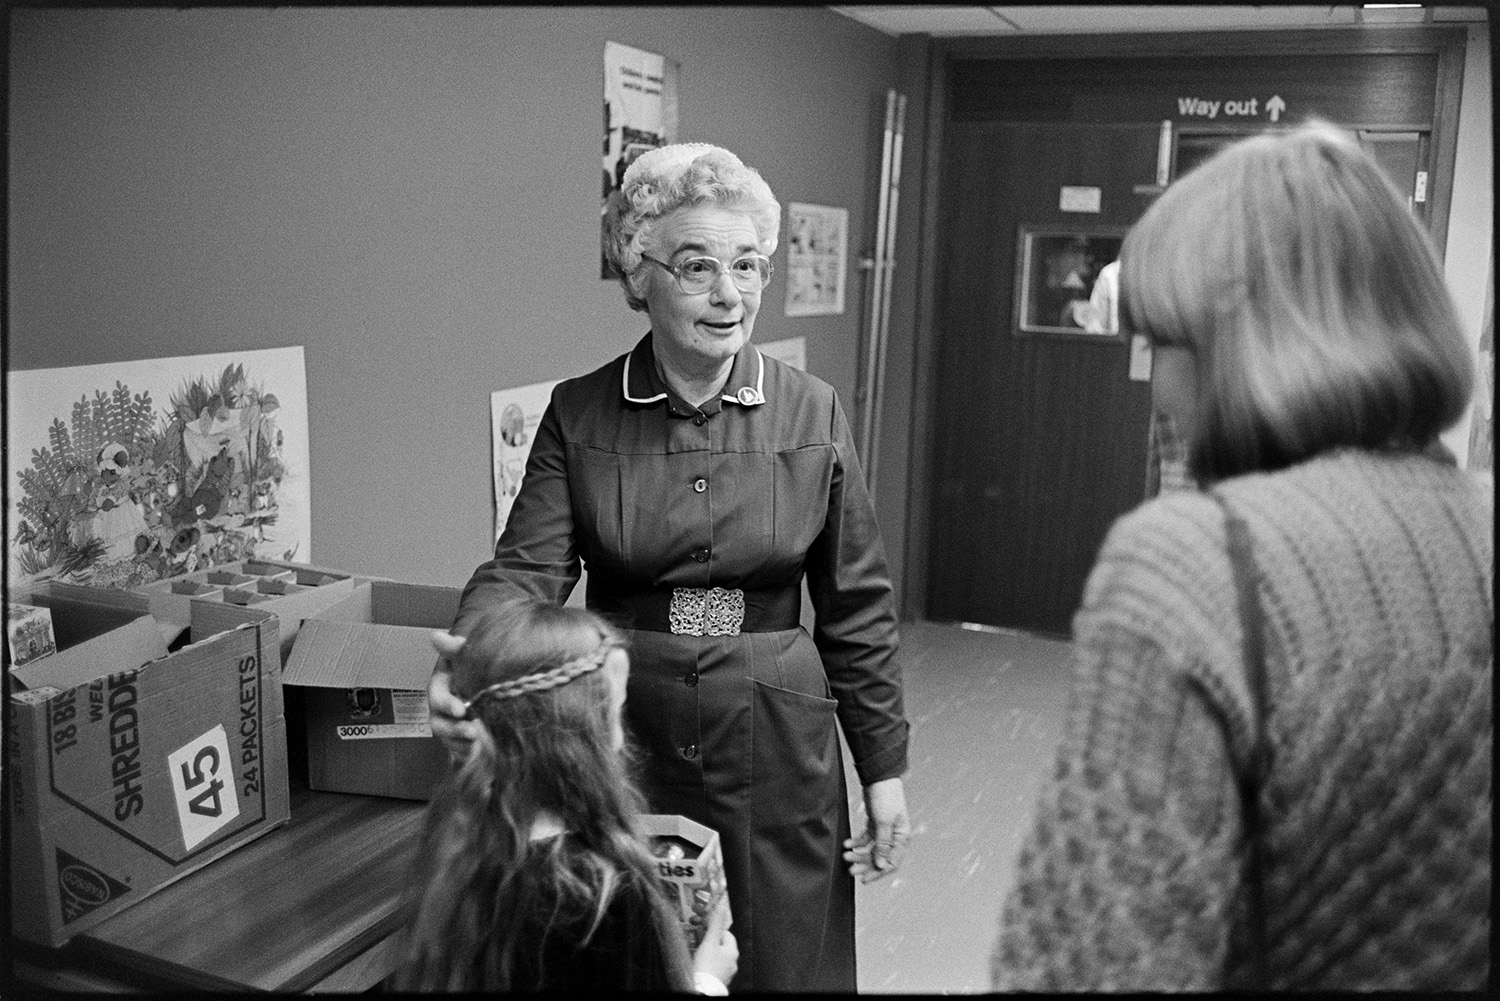 Ward Sister and nurses in ward of hospital. 
[The Ward Sister or Matron of the Children's Ward at Barnstaple general Hospital handing out an Easter egg to a girl and a woman.]